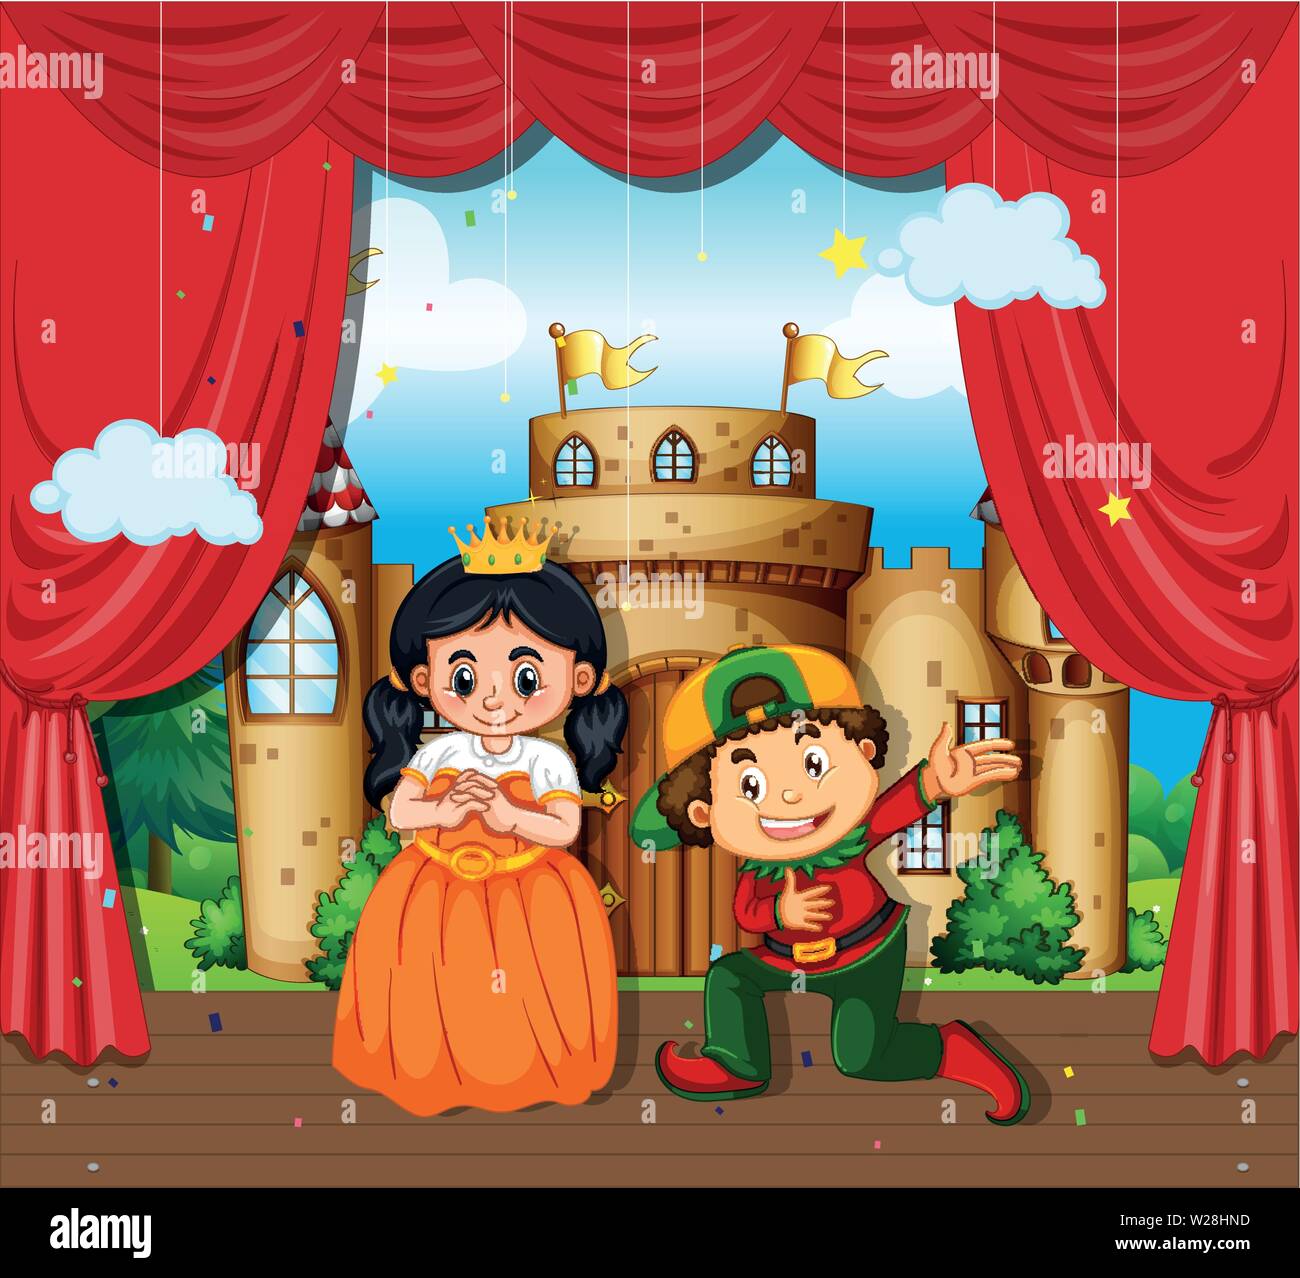 Boy and girl perform drama on stage illustration Stock Vector